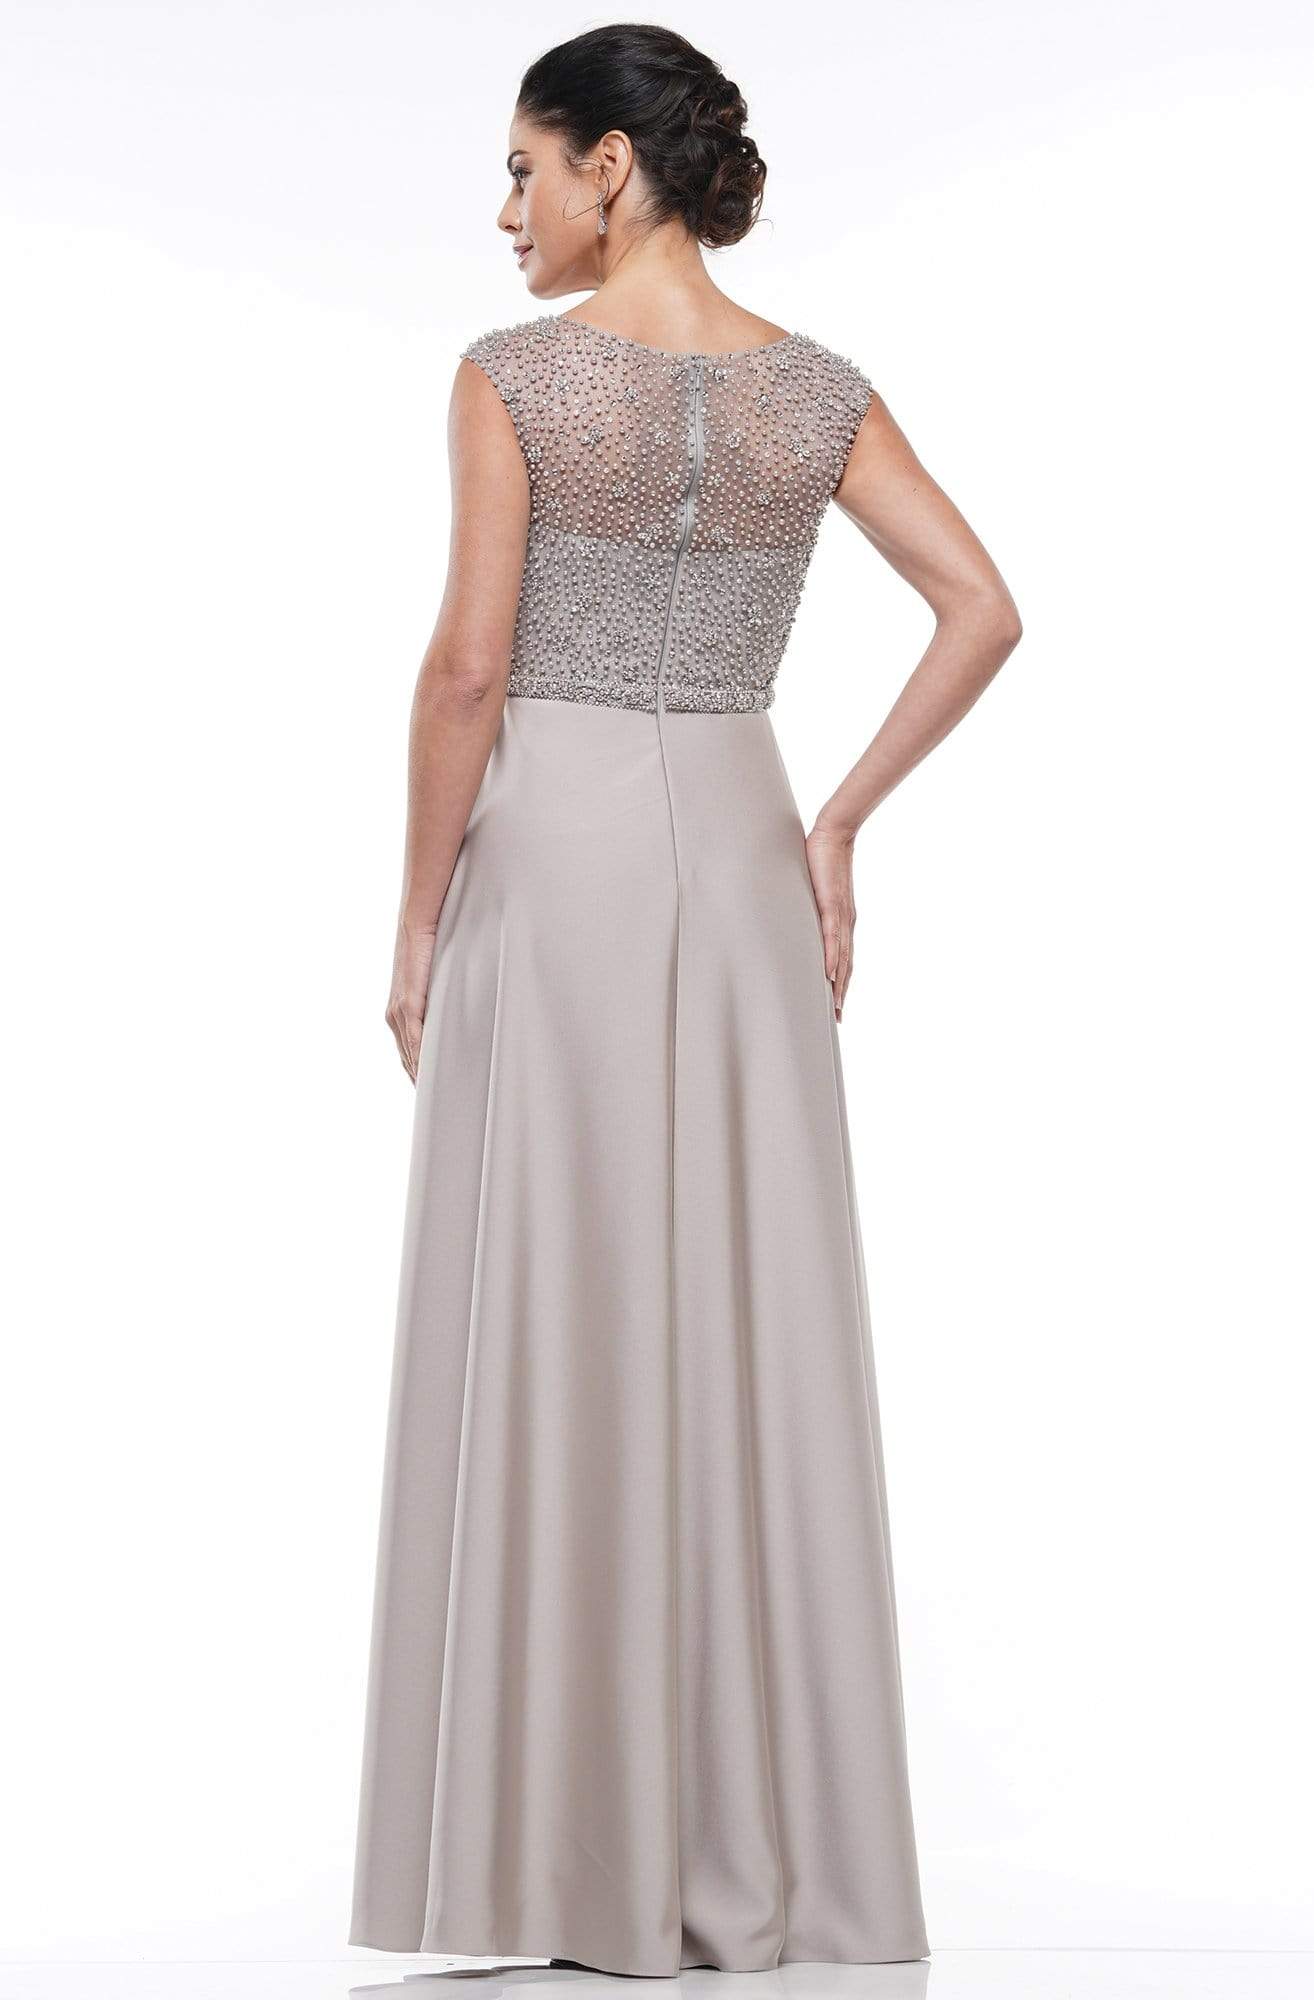 Marsoni By Colors - MV1002 Fully Beaded Top Faille A-Line Gown Mother of the Bride Dresses